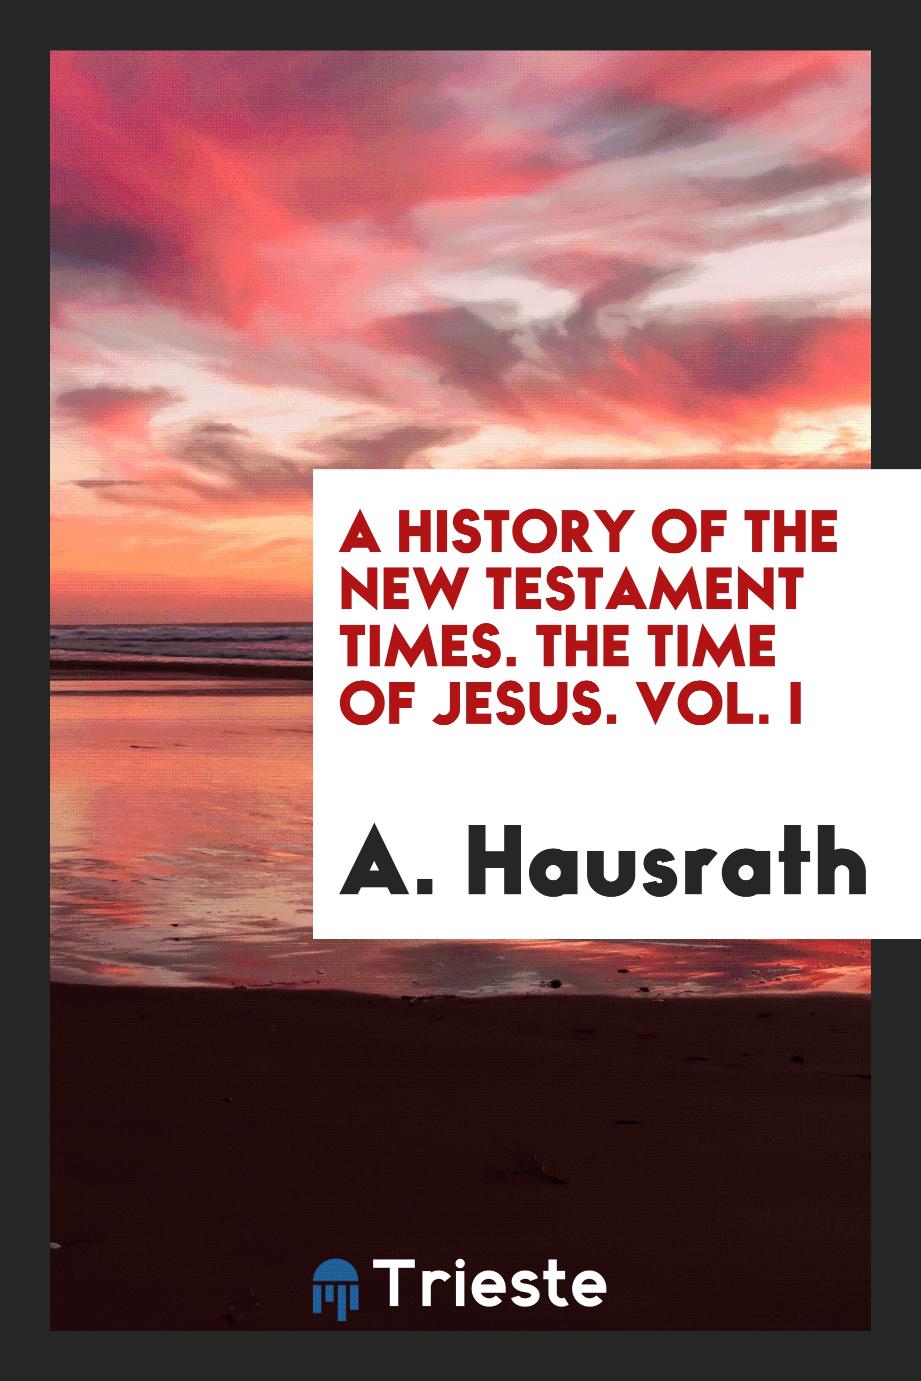 A History of the New Testament Times. The Time of Jesus. Vol. I